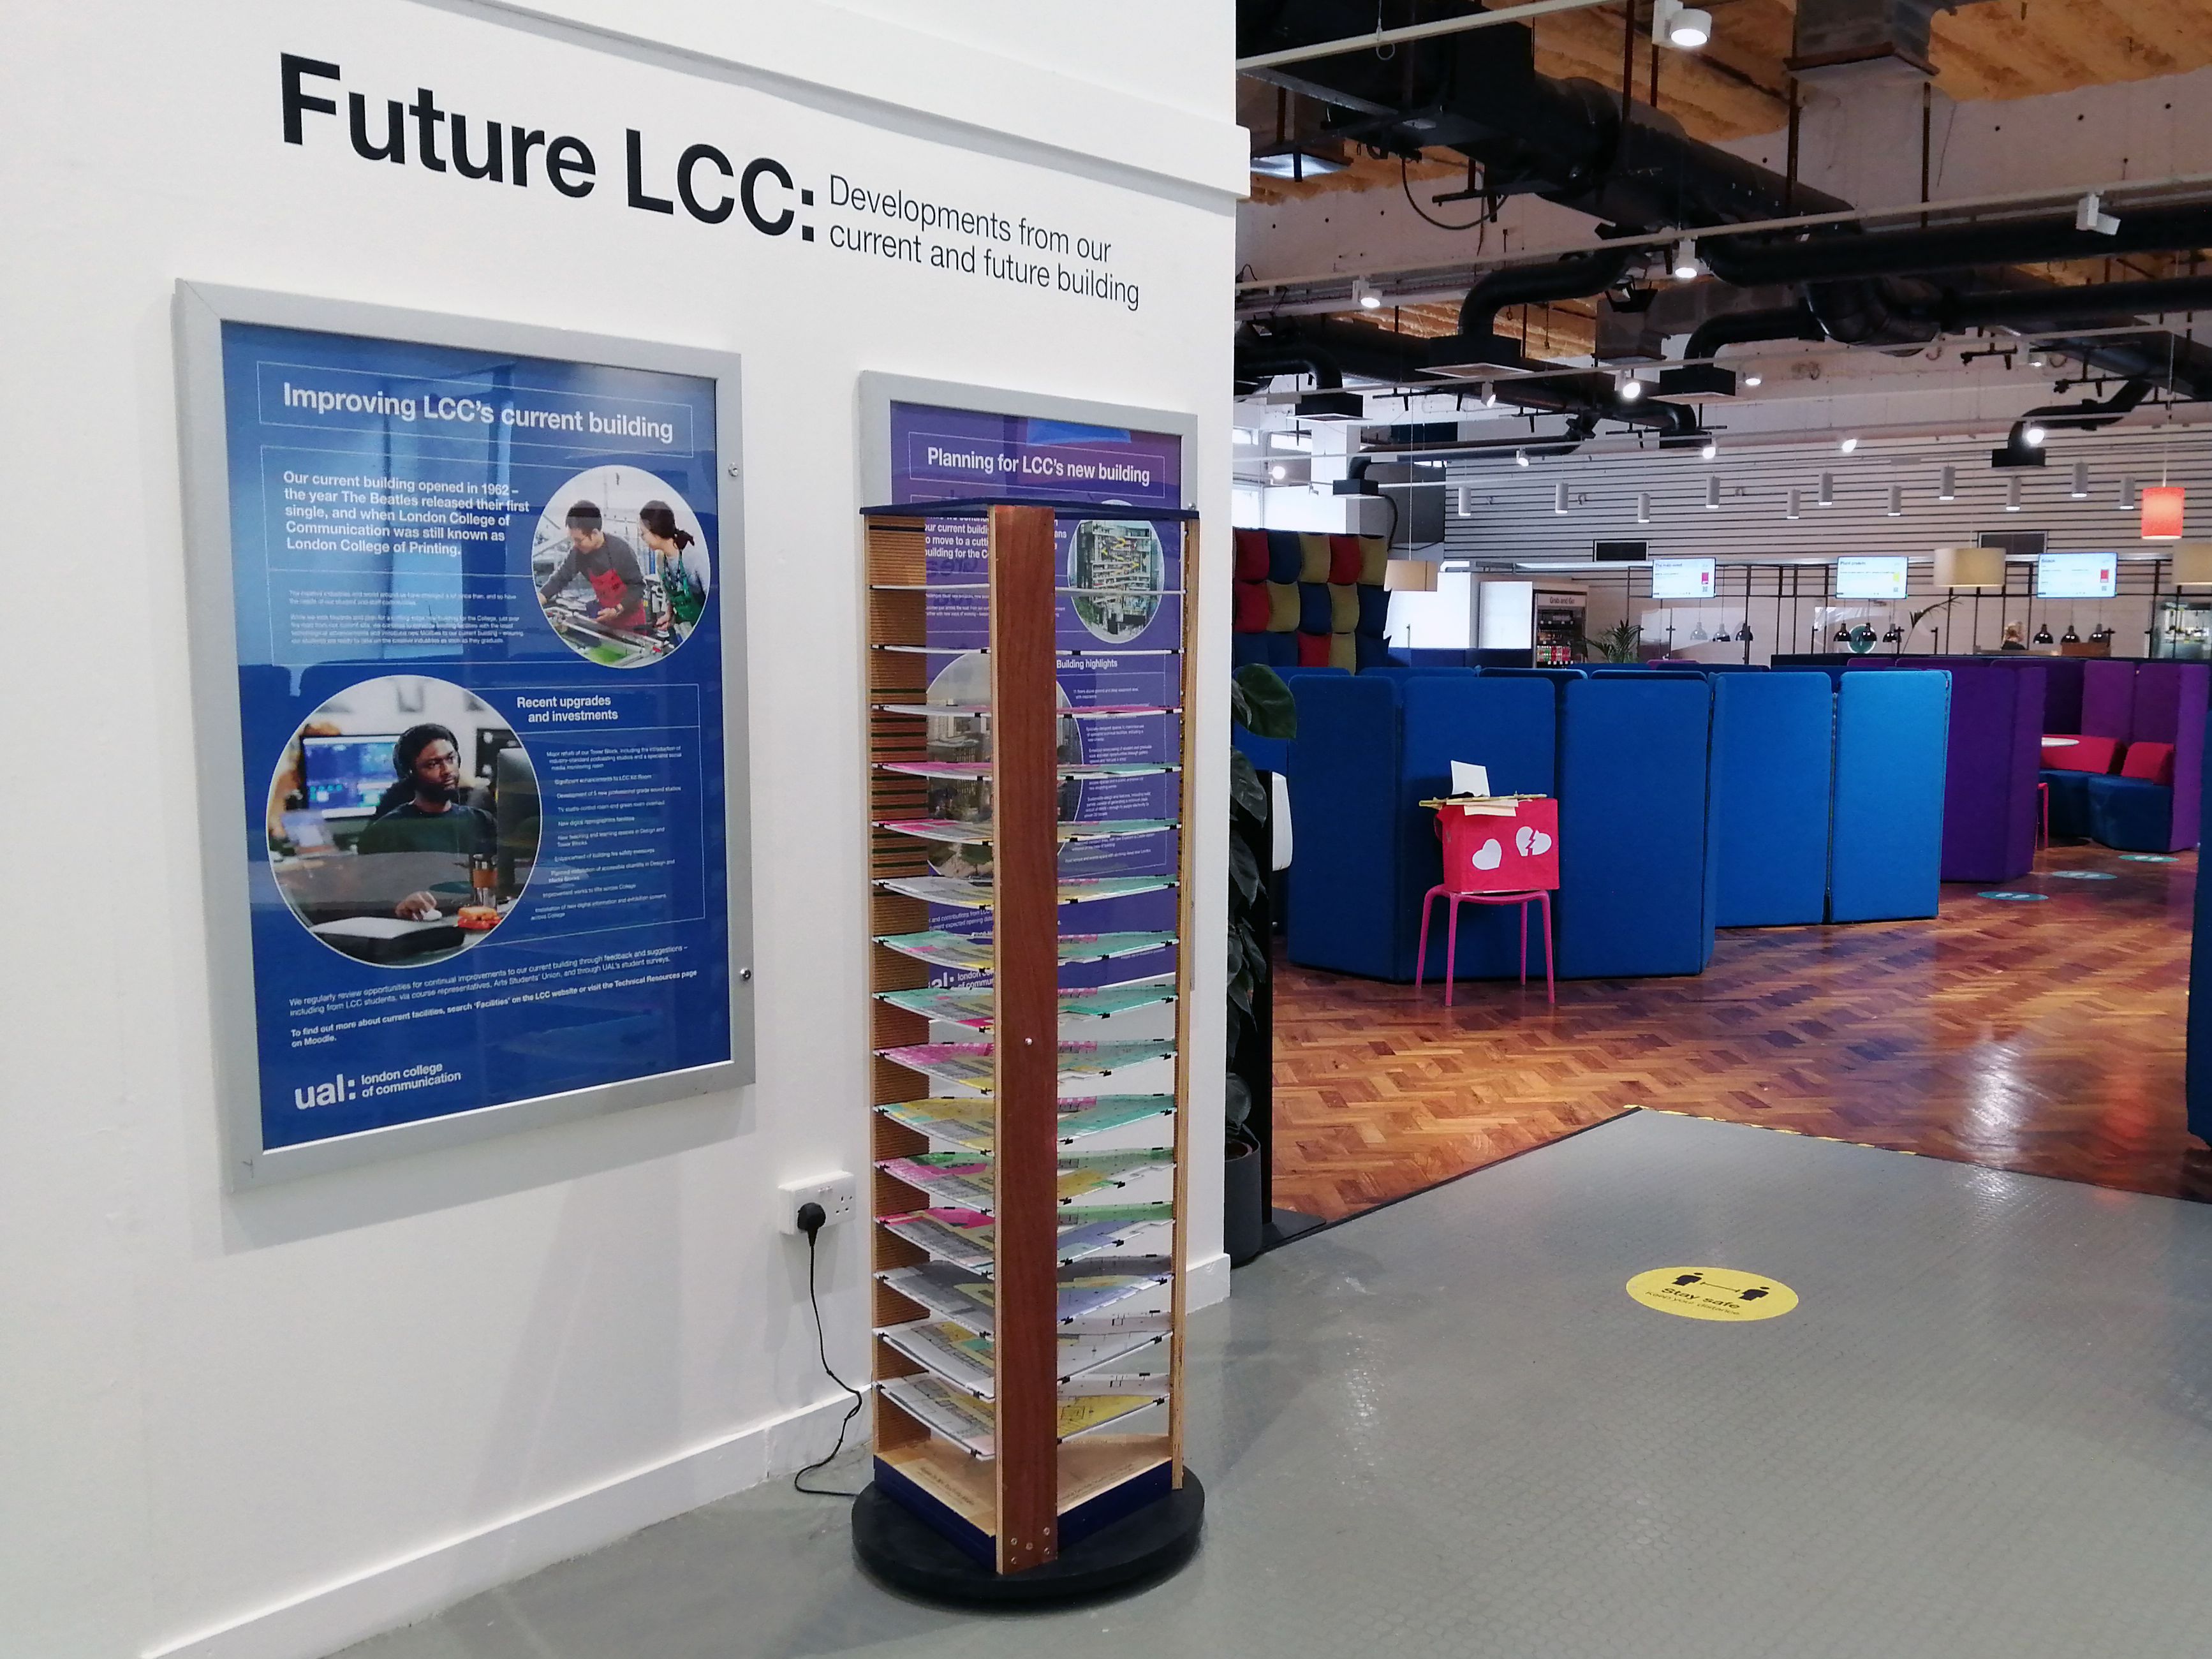 The 3D model of LCC's new building and two A0 posters, installed in the foyer area of the canteen